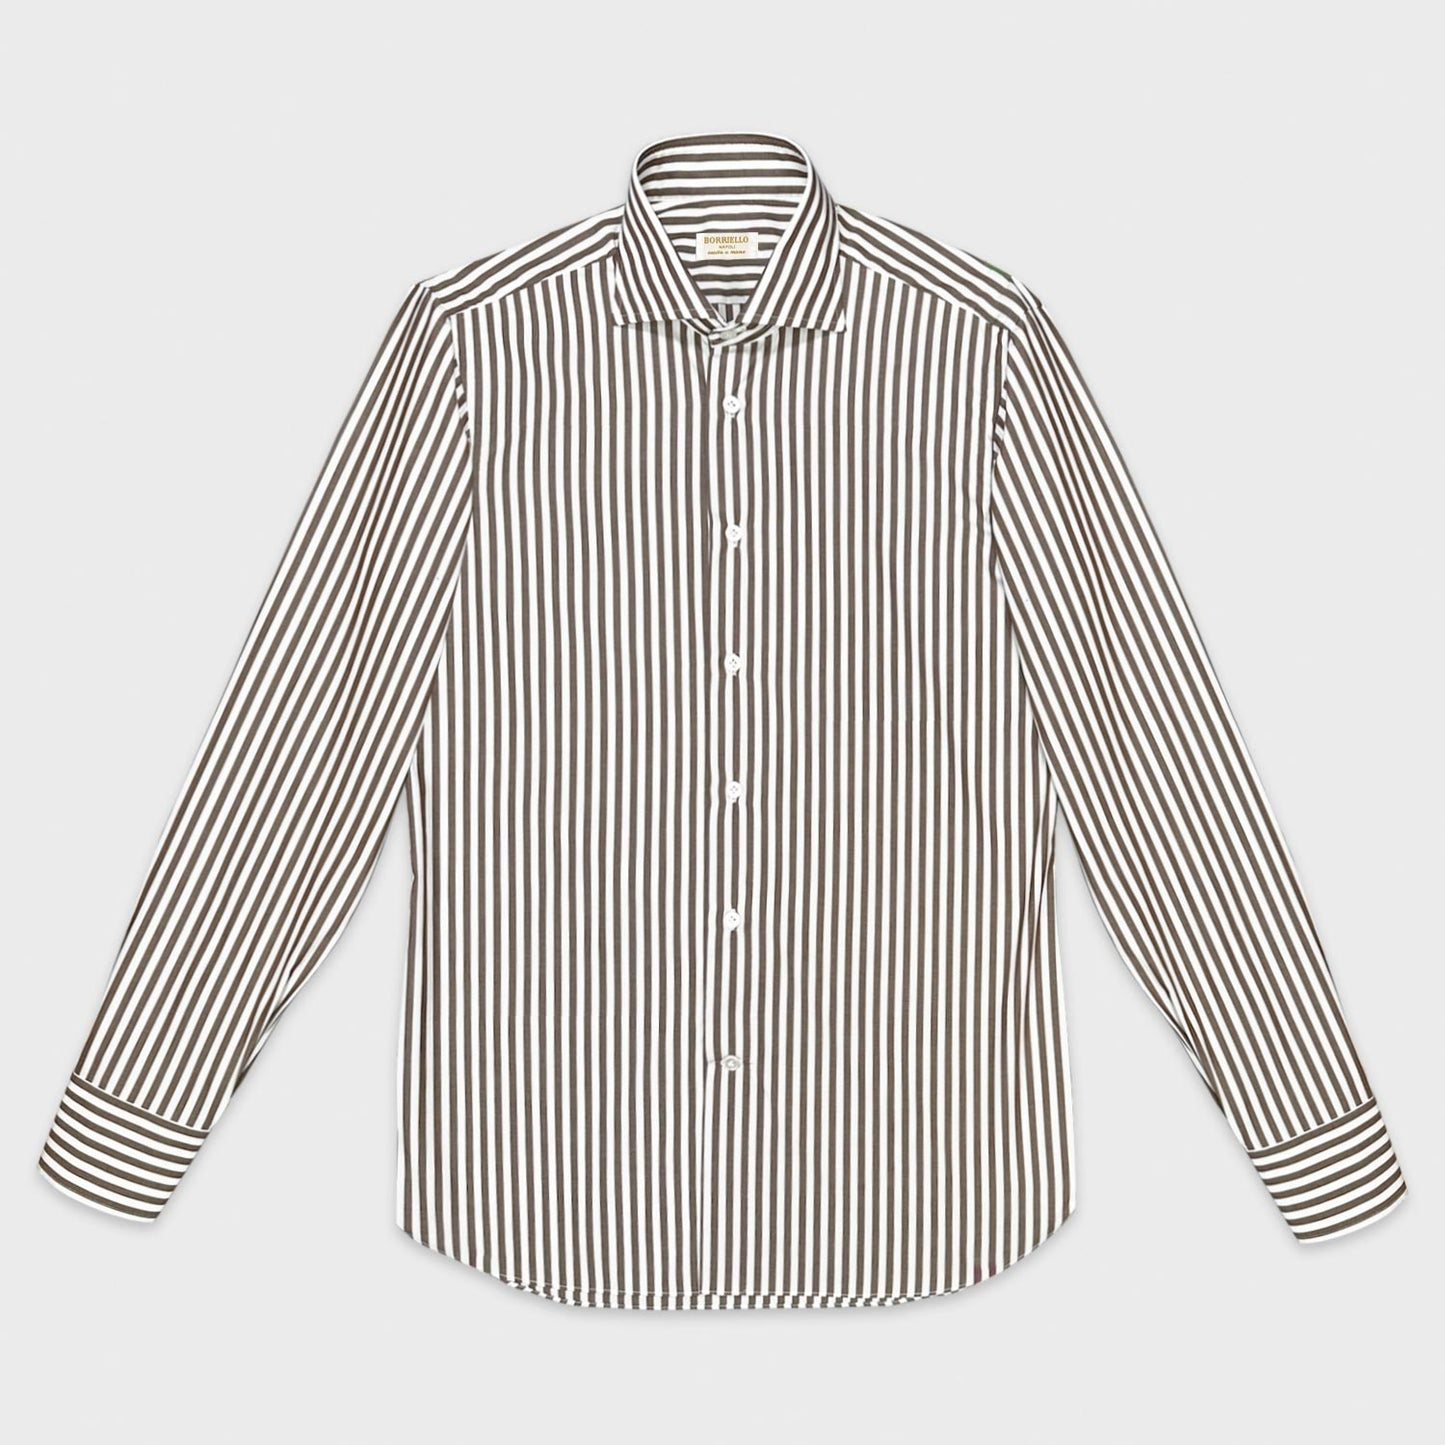 Load image into Gallery viewer, Borriello Coffee Brown Striped Shirt Popeline Cotton-Wools Boutique Uomo
